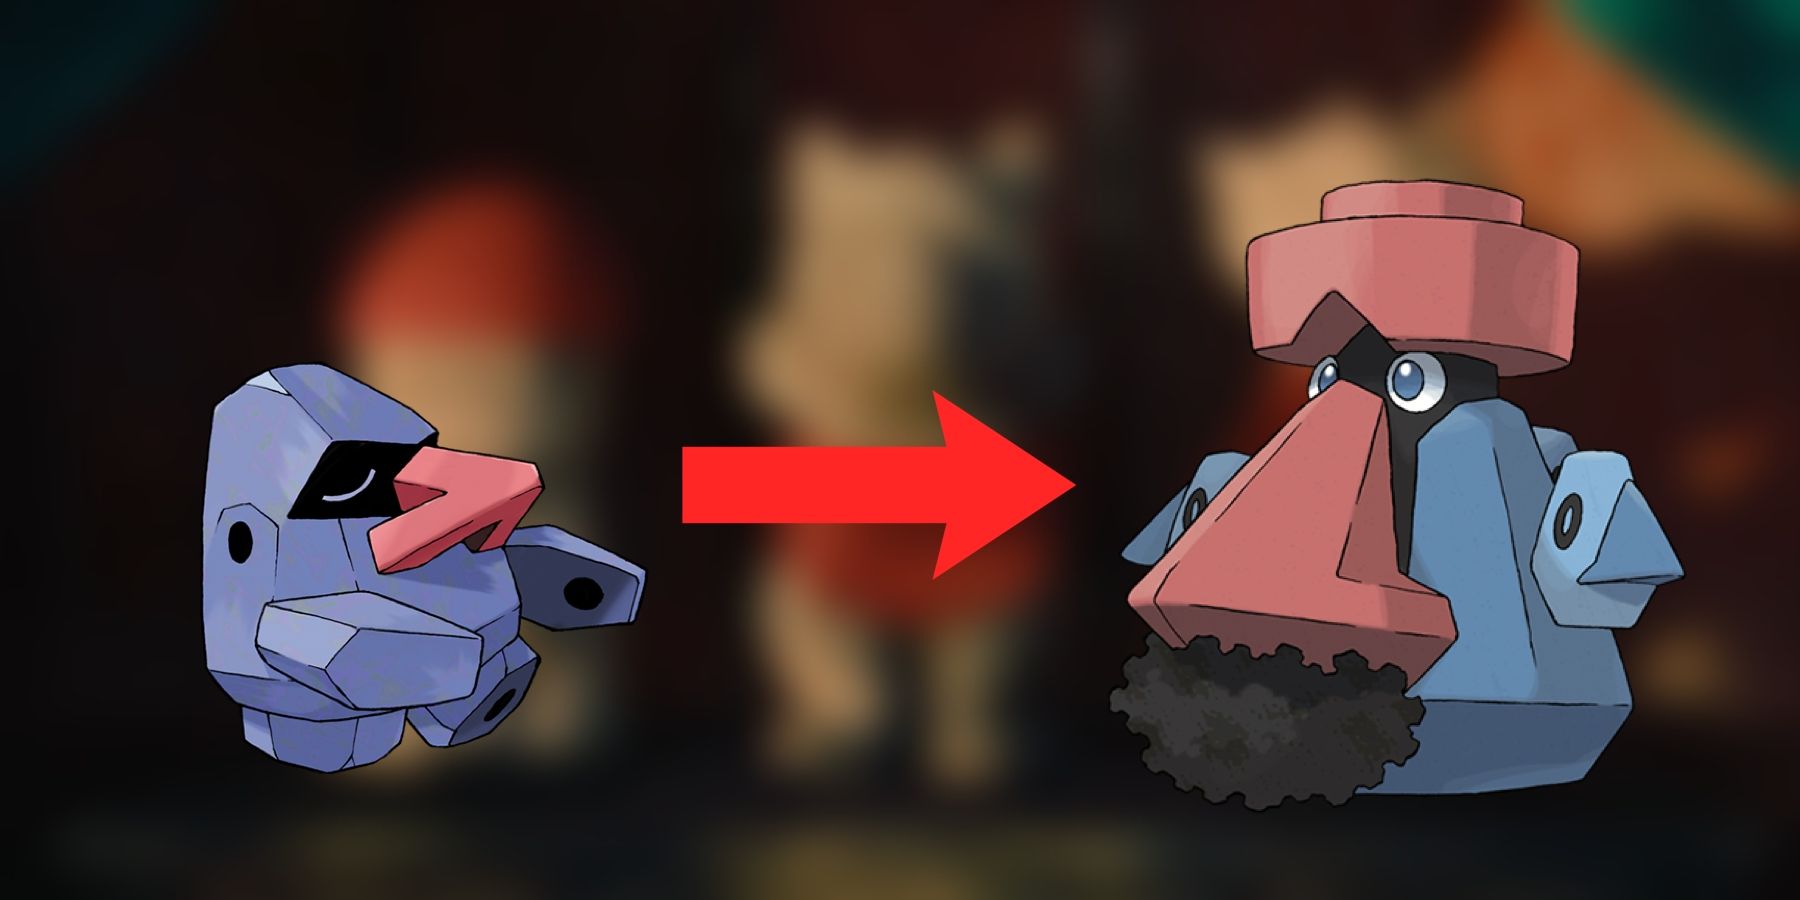 How to Evolve Chansey: 12 Steps (with Pictures) - wikiHow